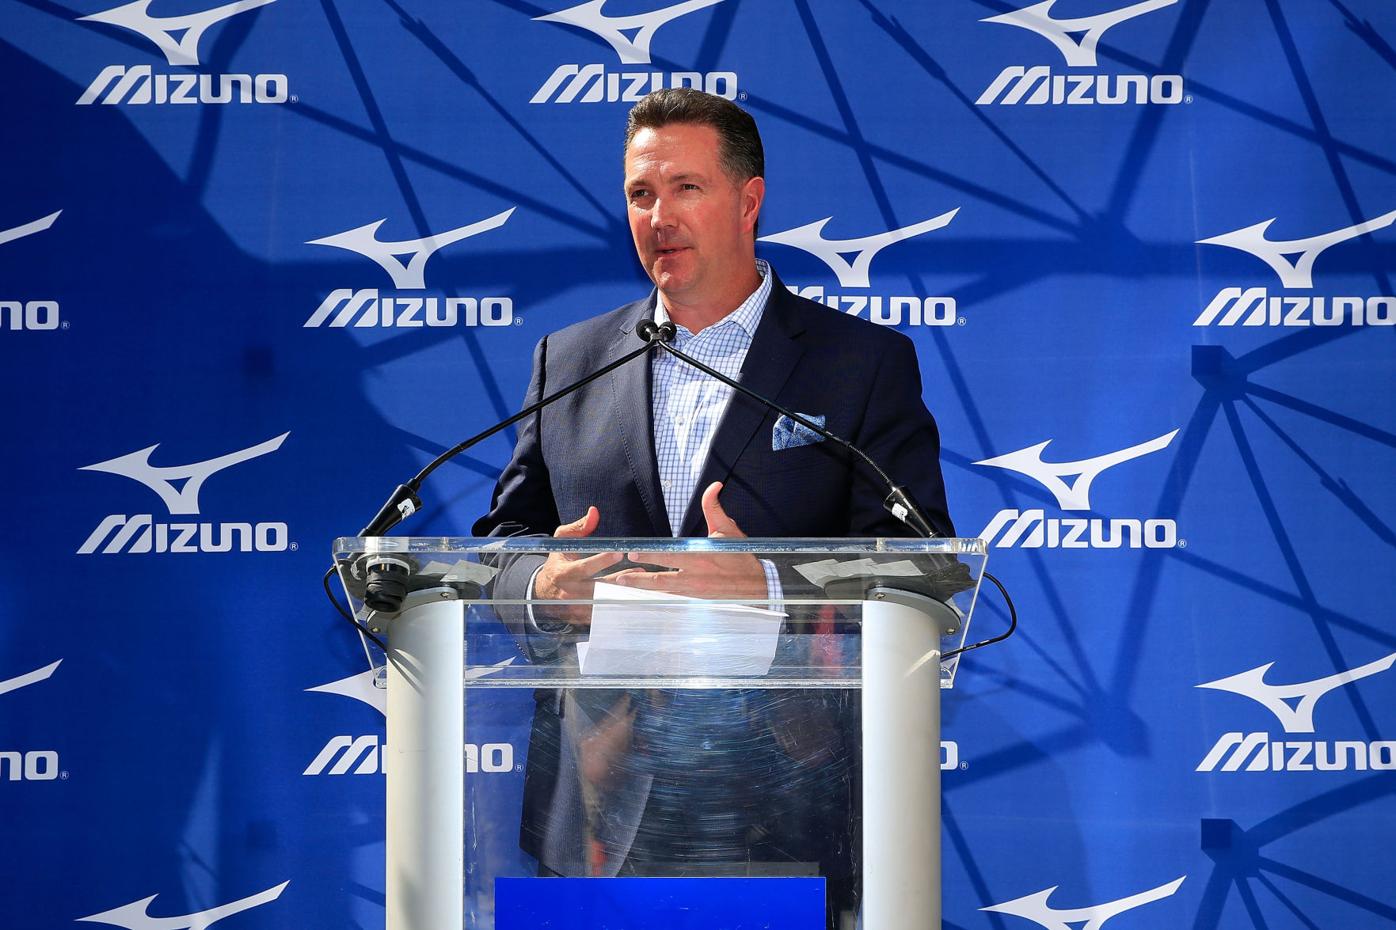 Mizuno Experience Center Opens At Braves' Mix-Used Development The